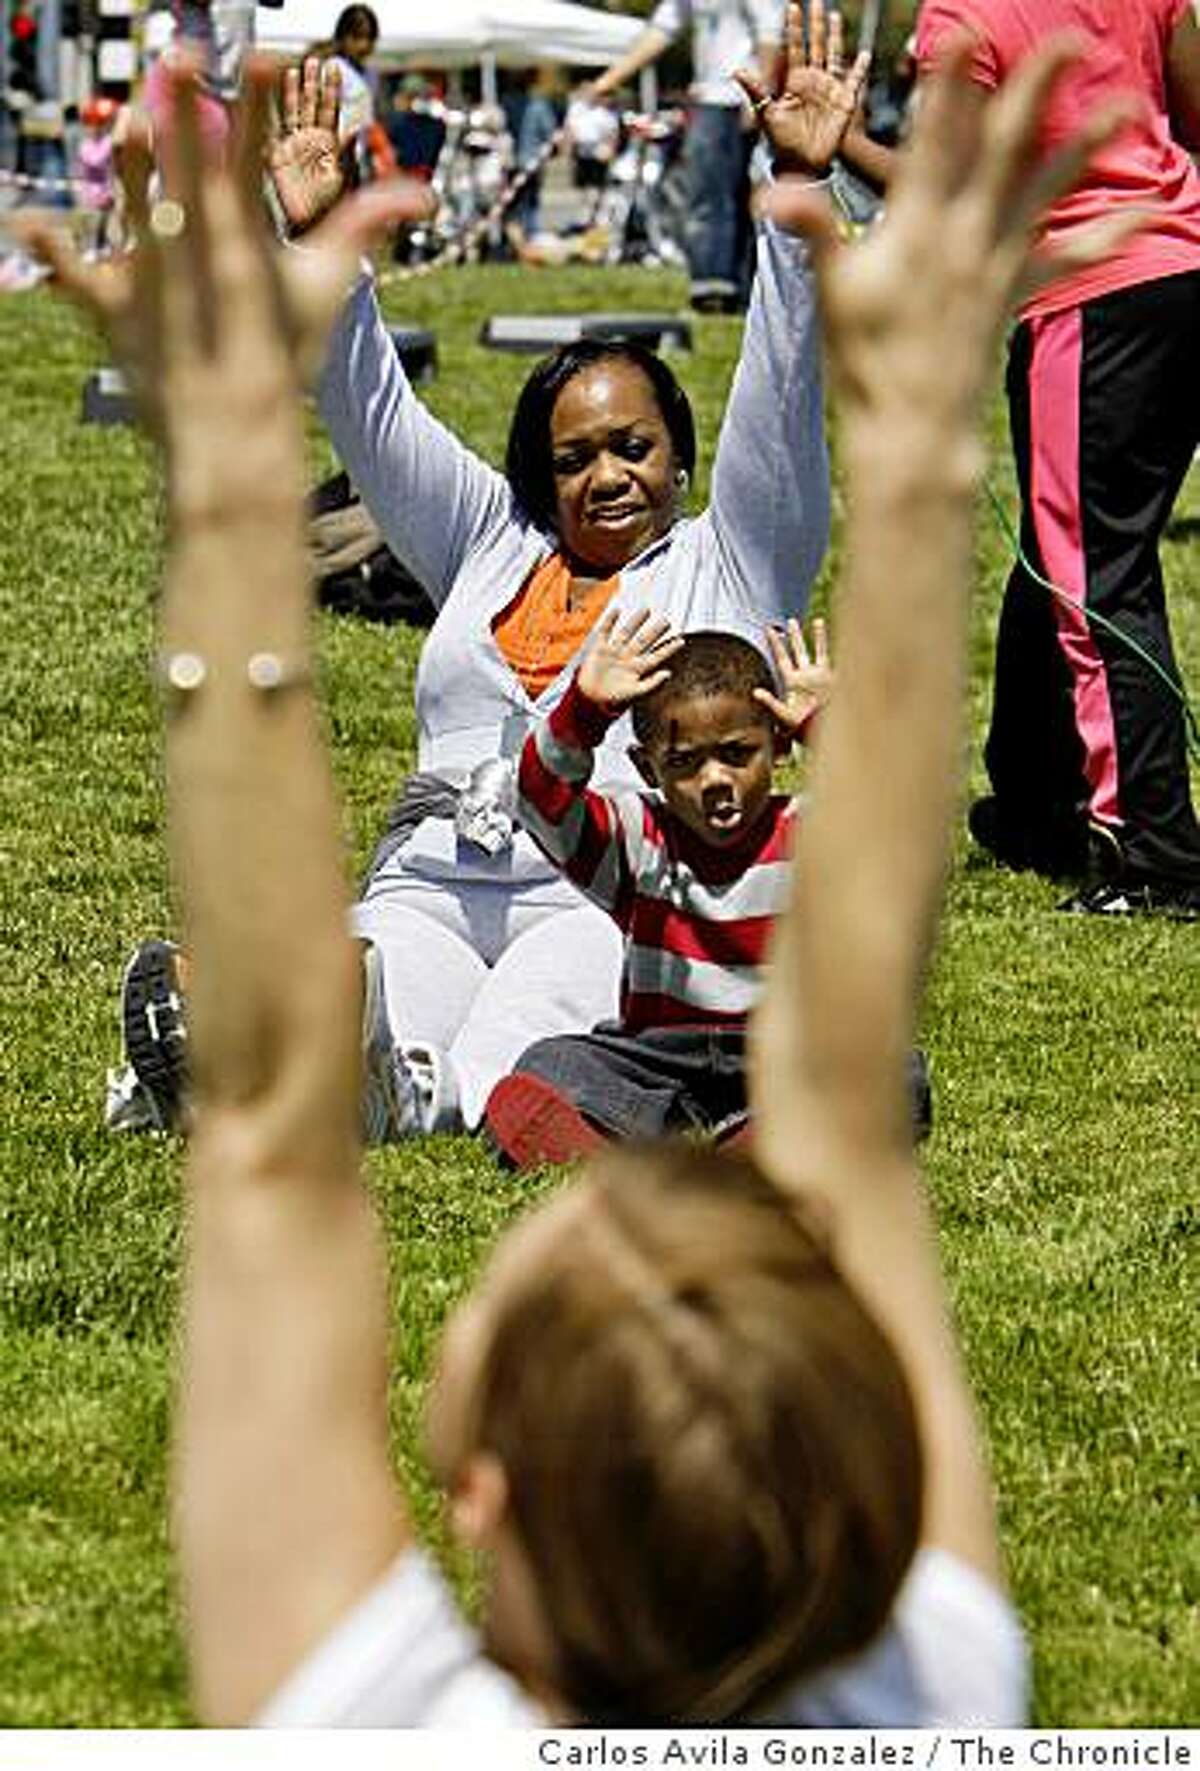 Clara McDaniel takes a Yoga class for kids with her grandson, Darnell Lemon, 4, on the Embarcadero on Sunday, April 26, 2009, that was part of the first Sunday Streets event for 2009. The event shut down the Embarcadero from about 9 a.m. to 1 p.m. from the ballpark to Fishermans' Wharf in San Francisco, Calif.